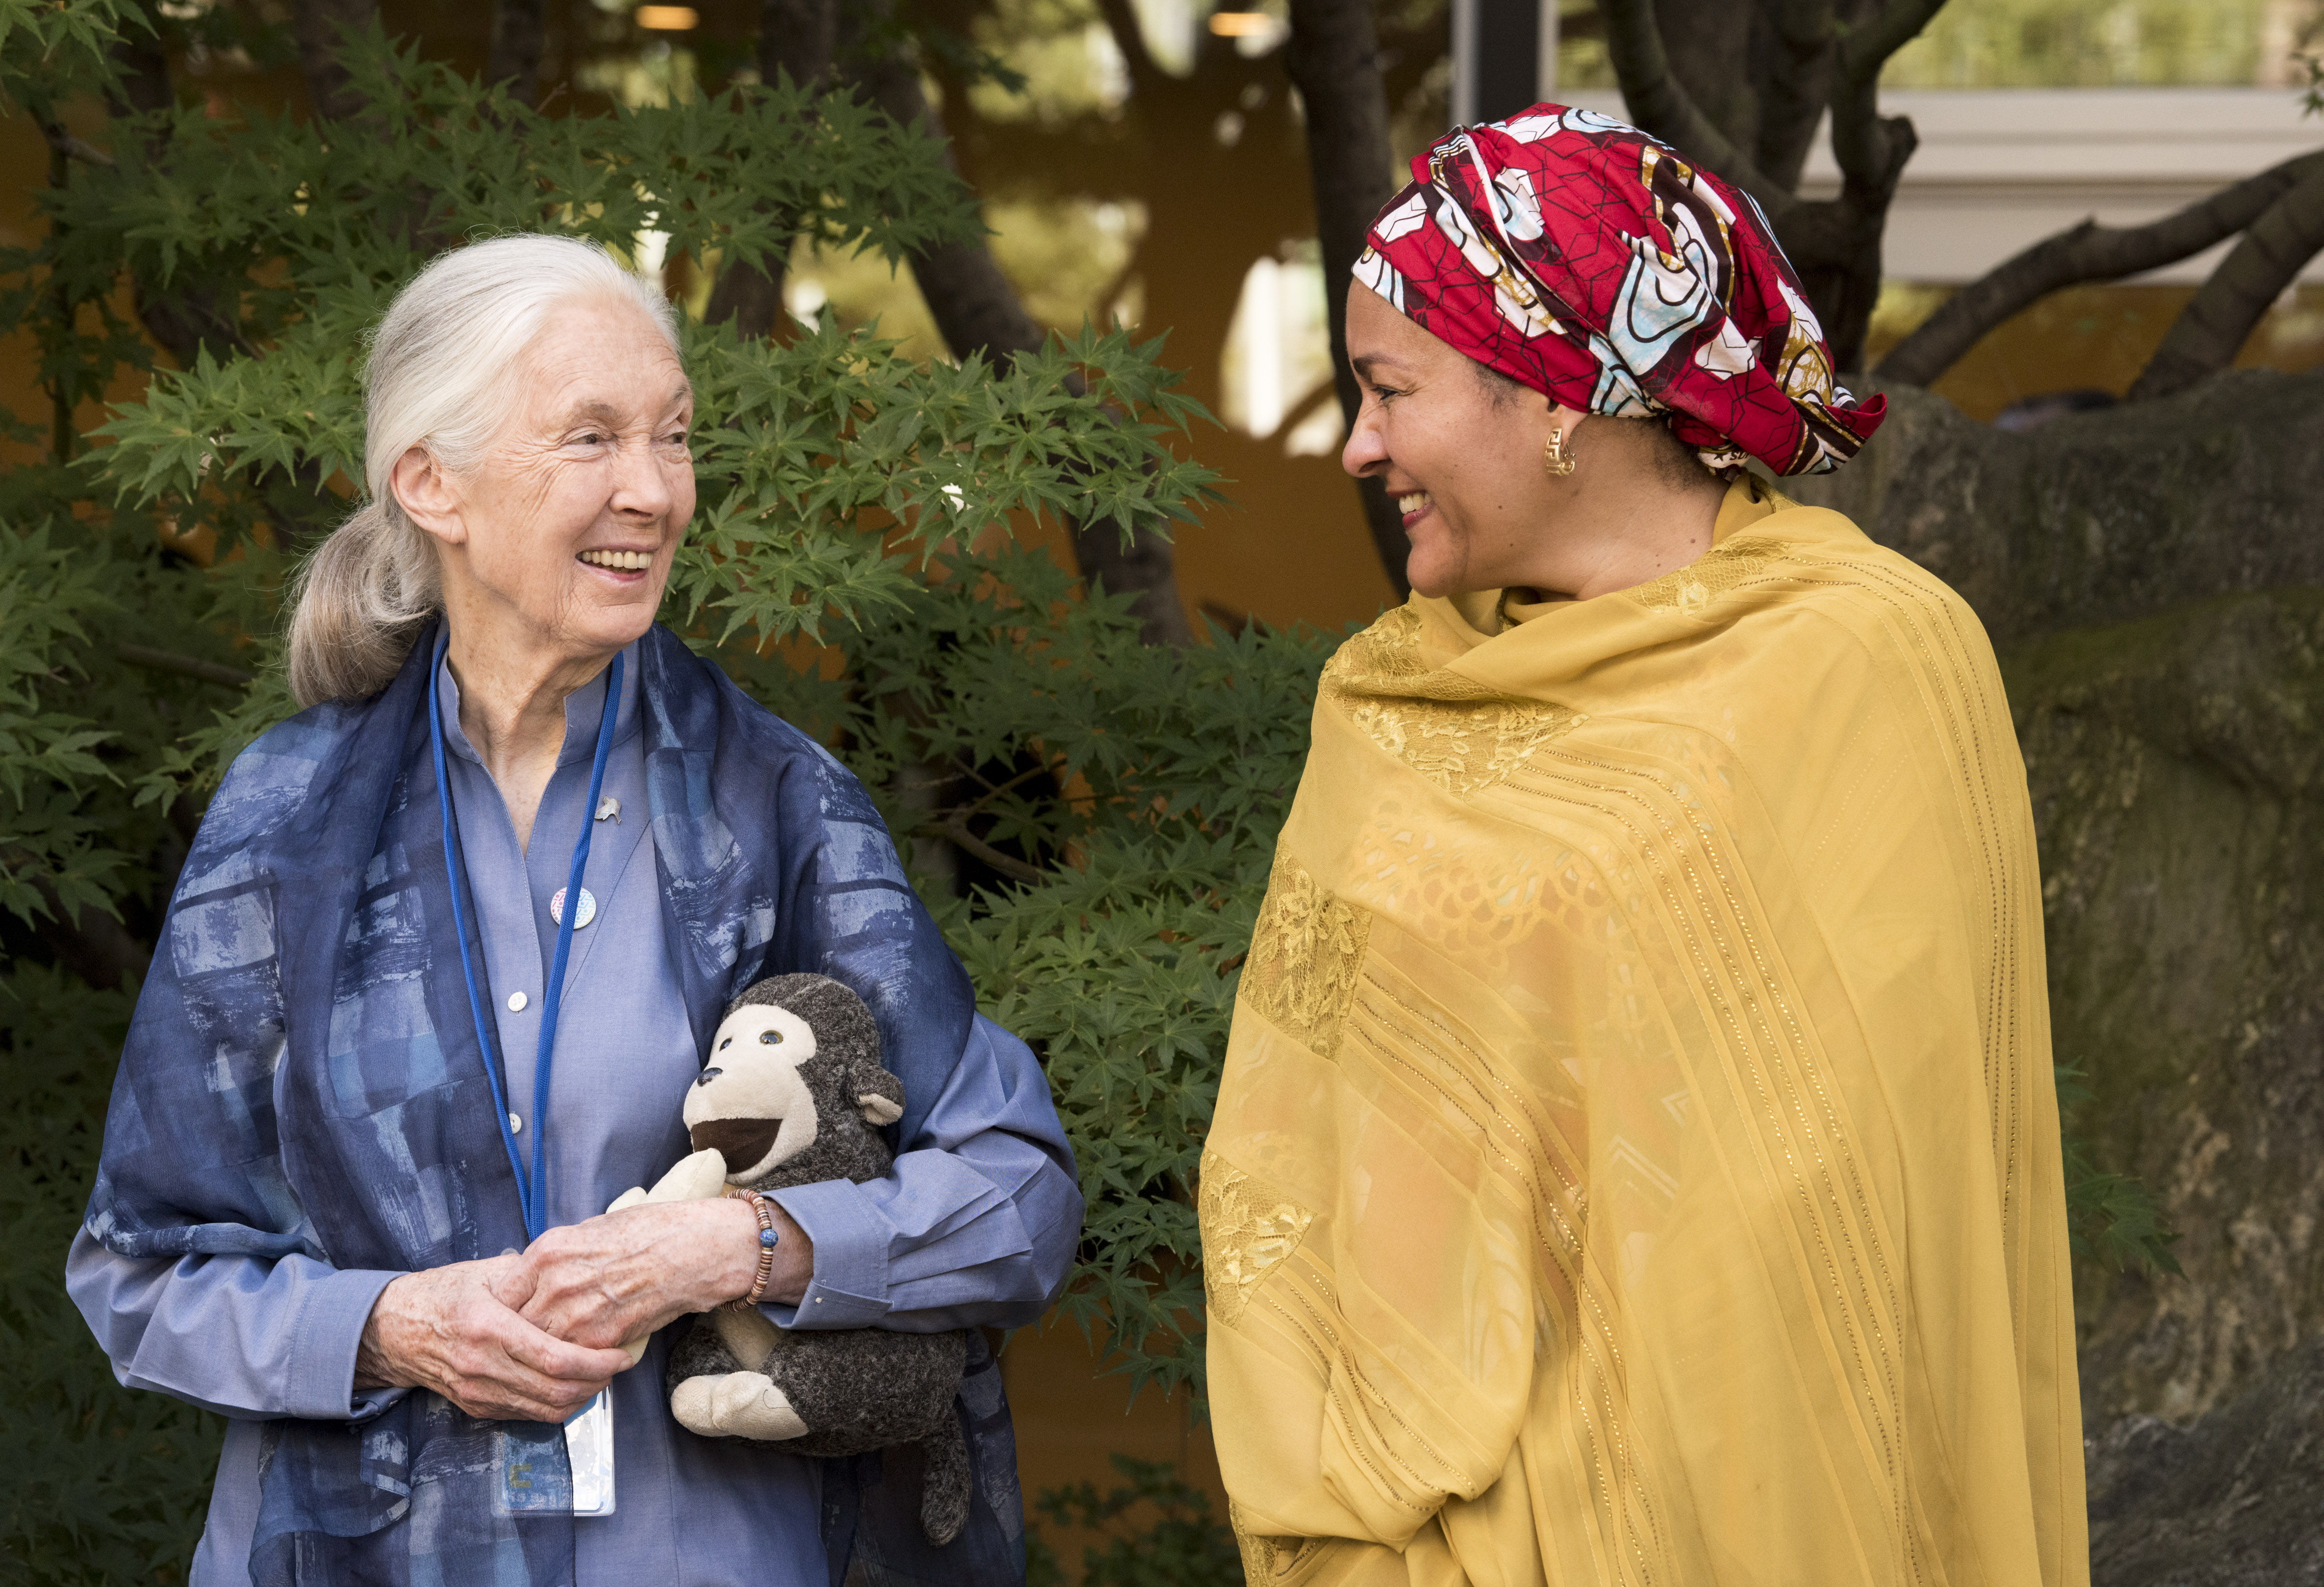 UN Messenger of Peace Jane Goodall with Deputy Secretary-General Amina Mohammed during the annual Peace Bell Ceremony held at 51Թ headquarters in observance of the International Day of Peace (21 September). 15 Sep 2017/UN Photo/Kim Haughton